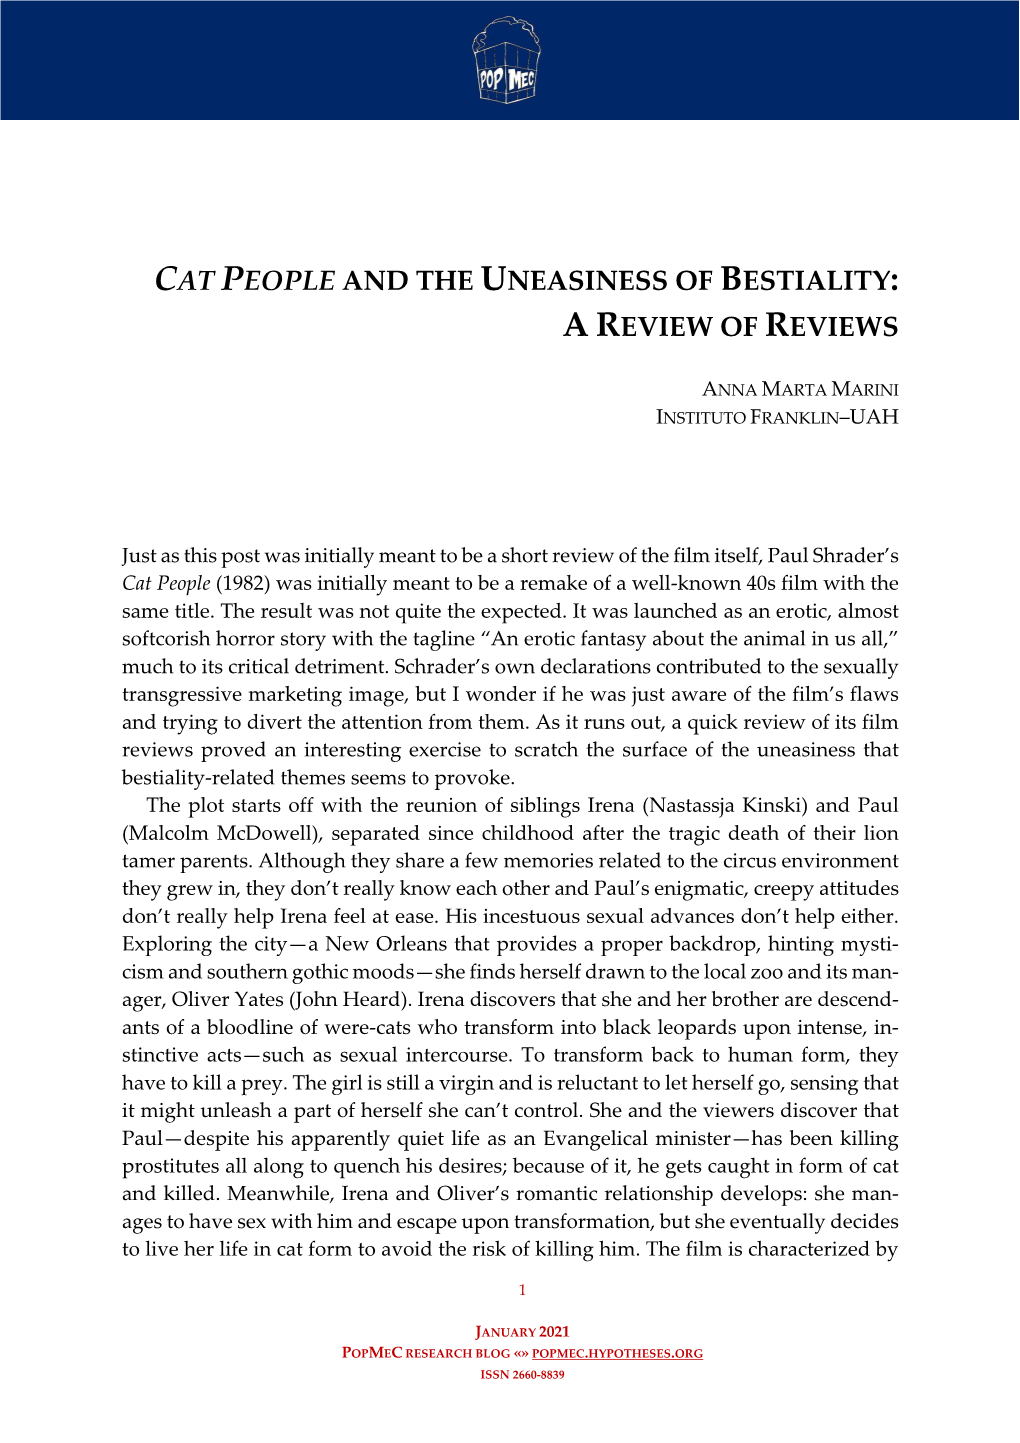 Cat People and the Uneasiness of Bestiality: a Review of Reviews